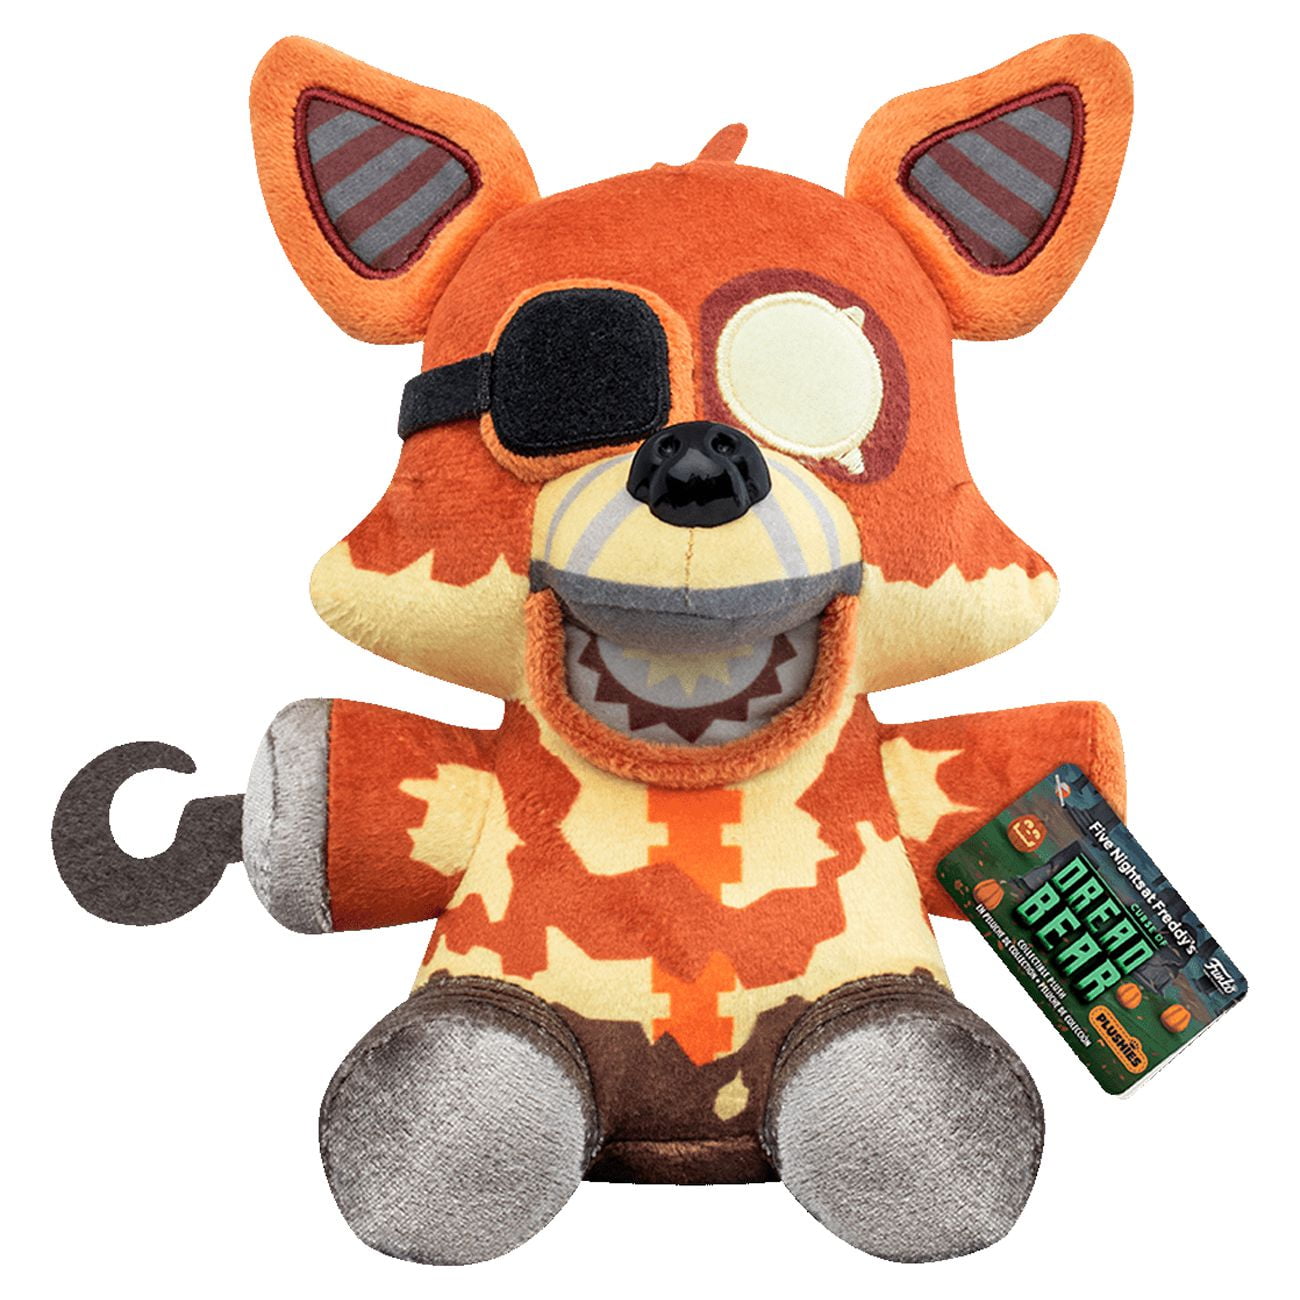 FNAF 4 Nightmare Foxy Plush 6. Display model only. No tags